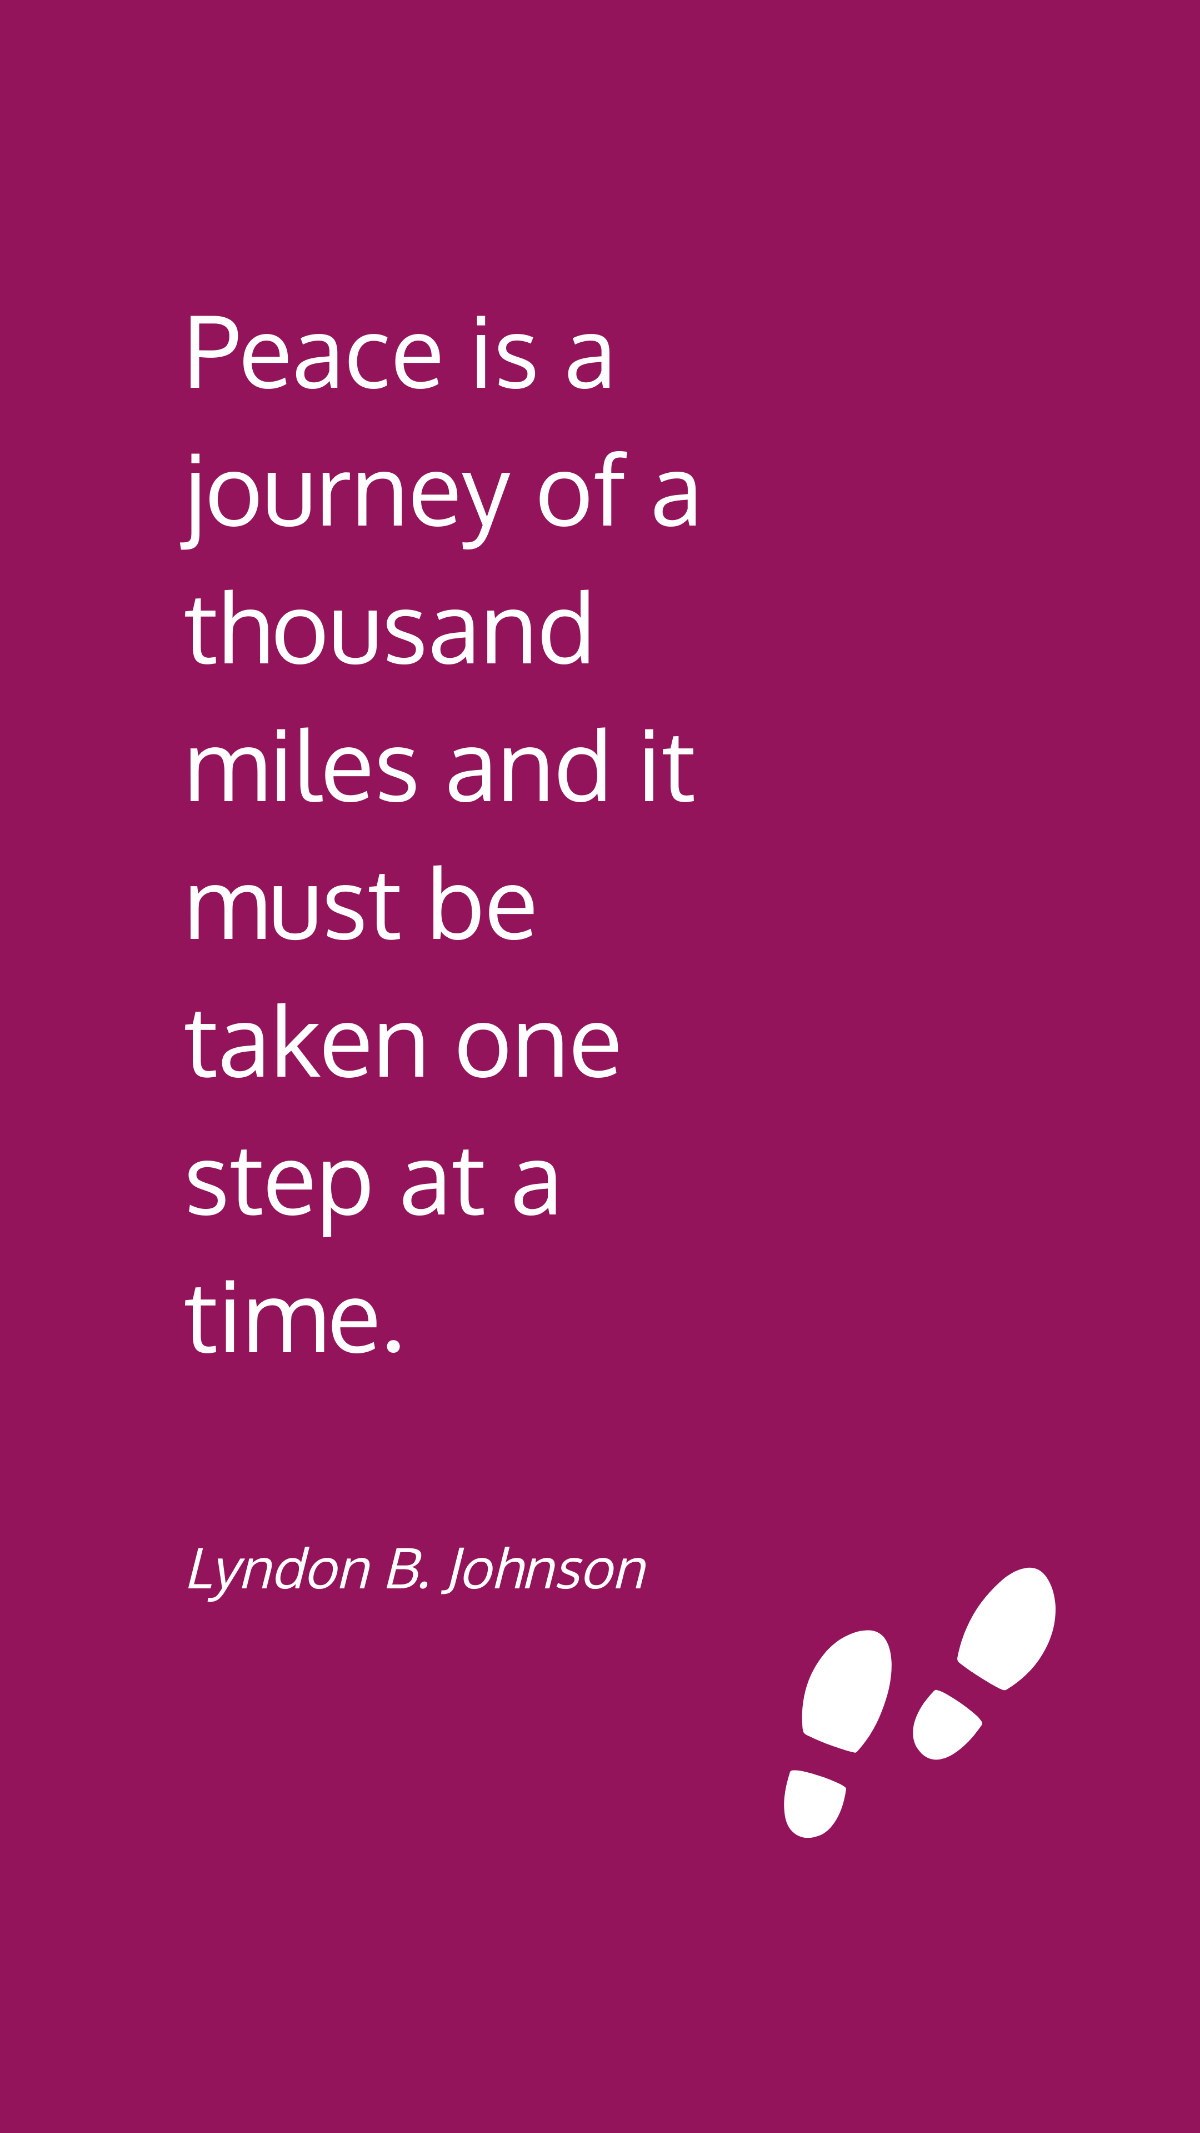 Free Lyndon B. Johnson - Peace is a journey of a thousand miles and it must be taken one step at a time. Template